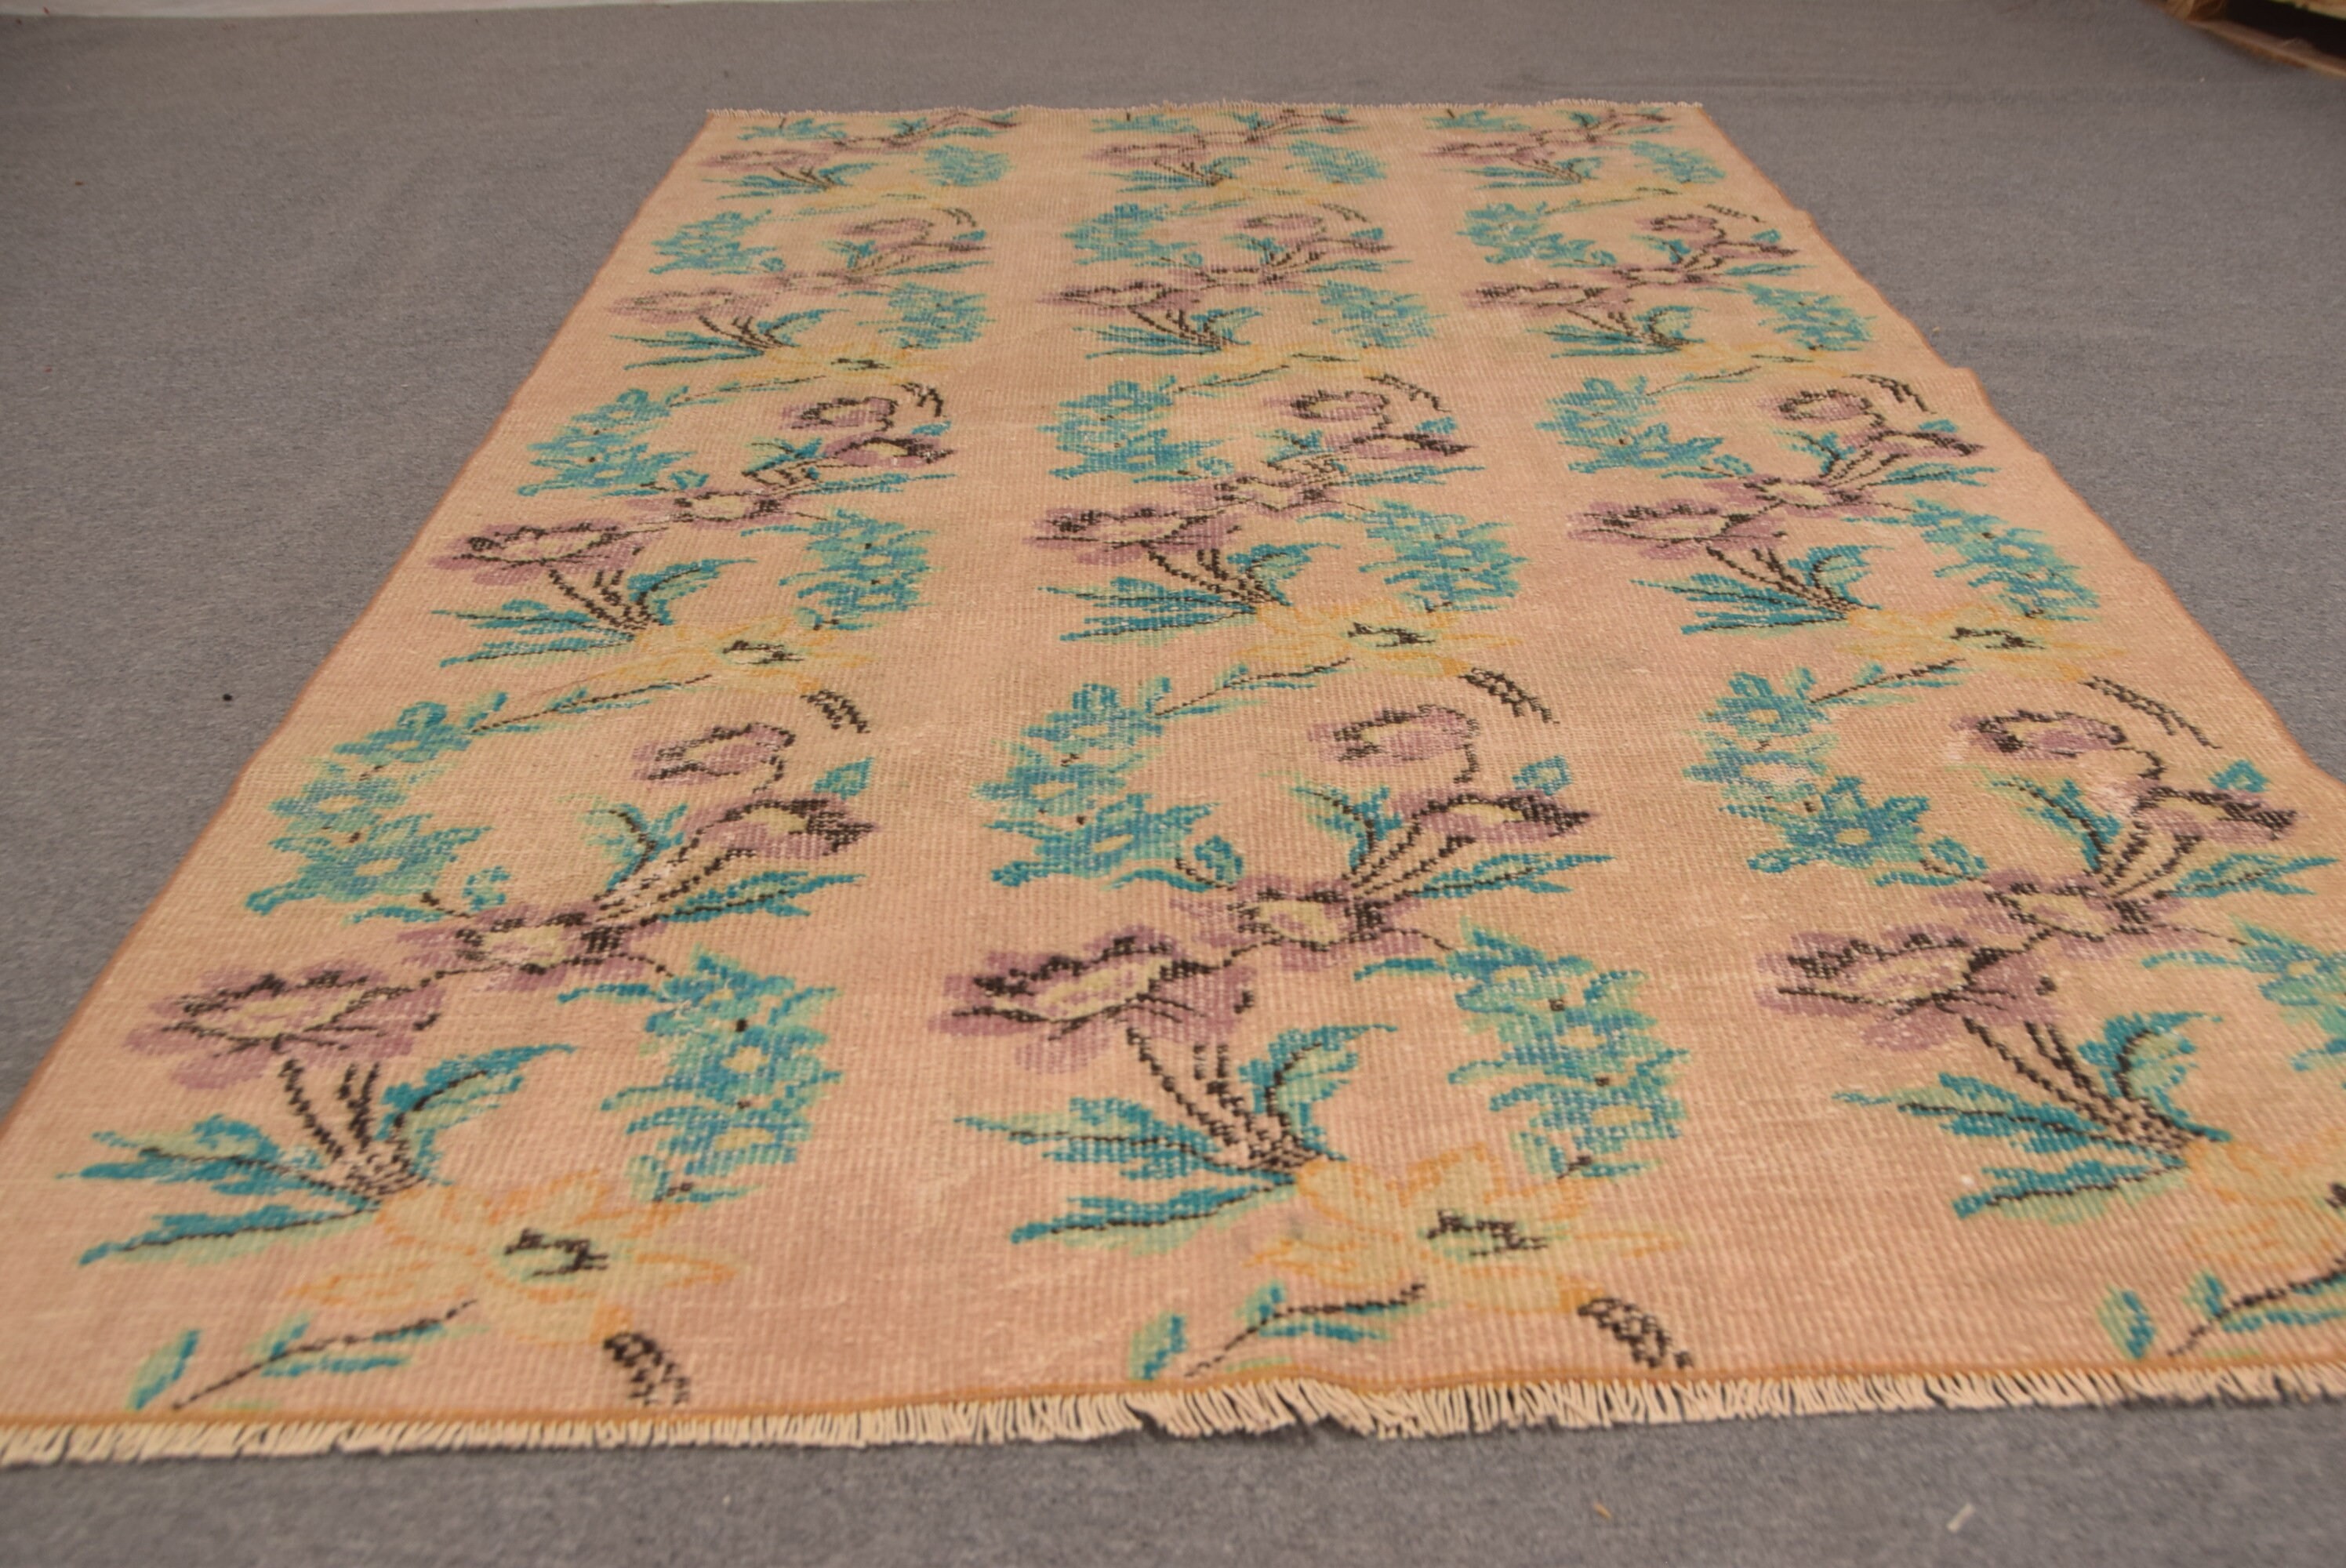 5.1x8.1 ft Large Rug, Cool Rug, Beige Antique Rug, Home Decor Rug, Dining Room Rugs, Eclectic Rugs, Salon Rug, Vintage Rugs, Turkish Rugs